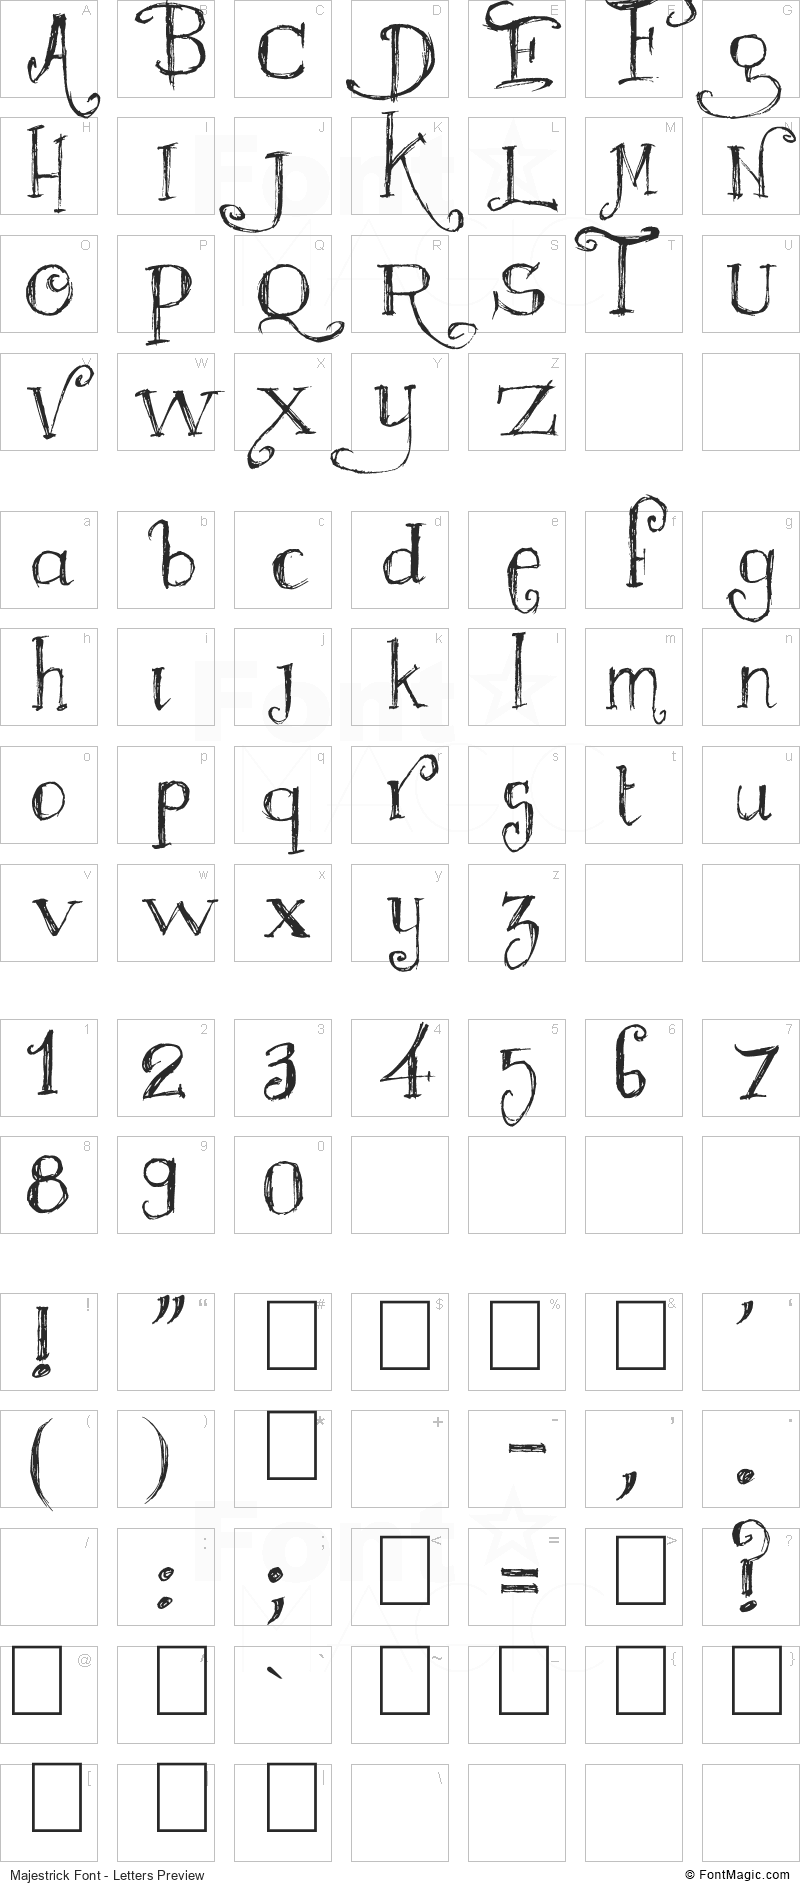 Majestrick Font - All Latters Preview Chart